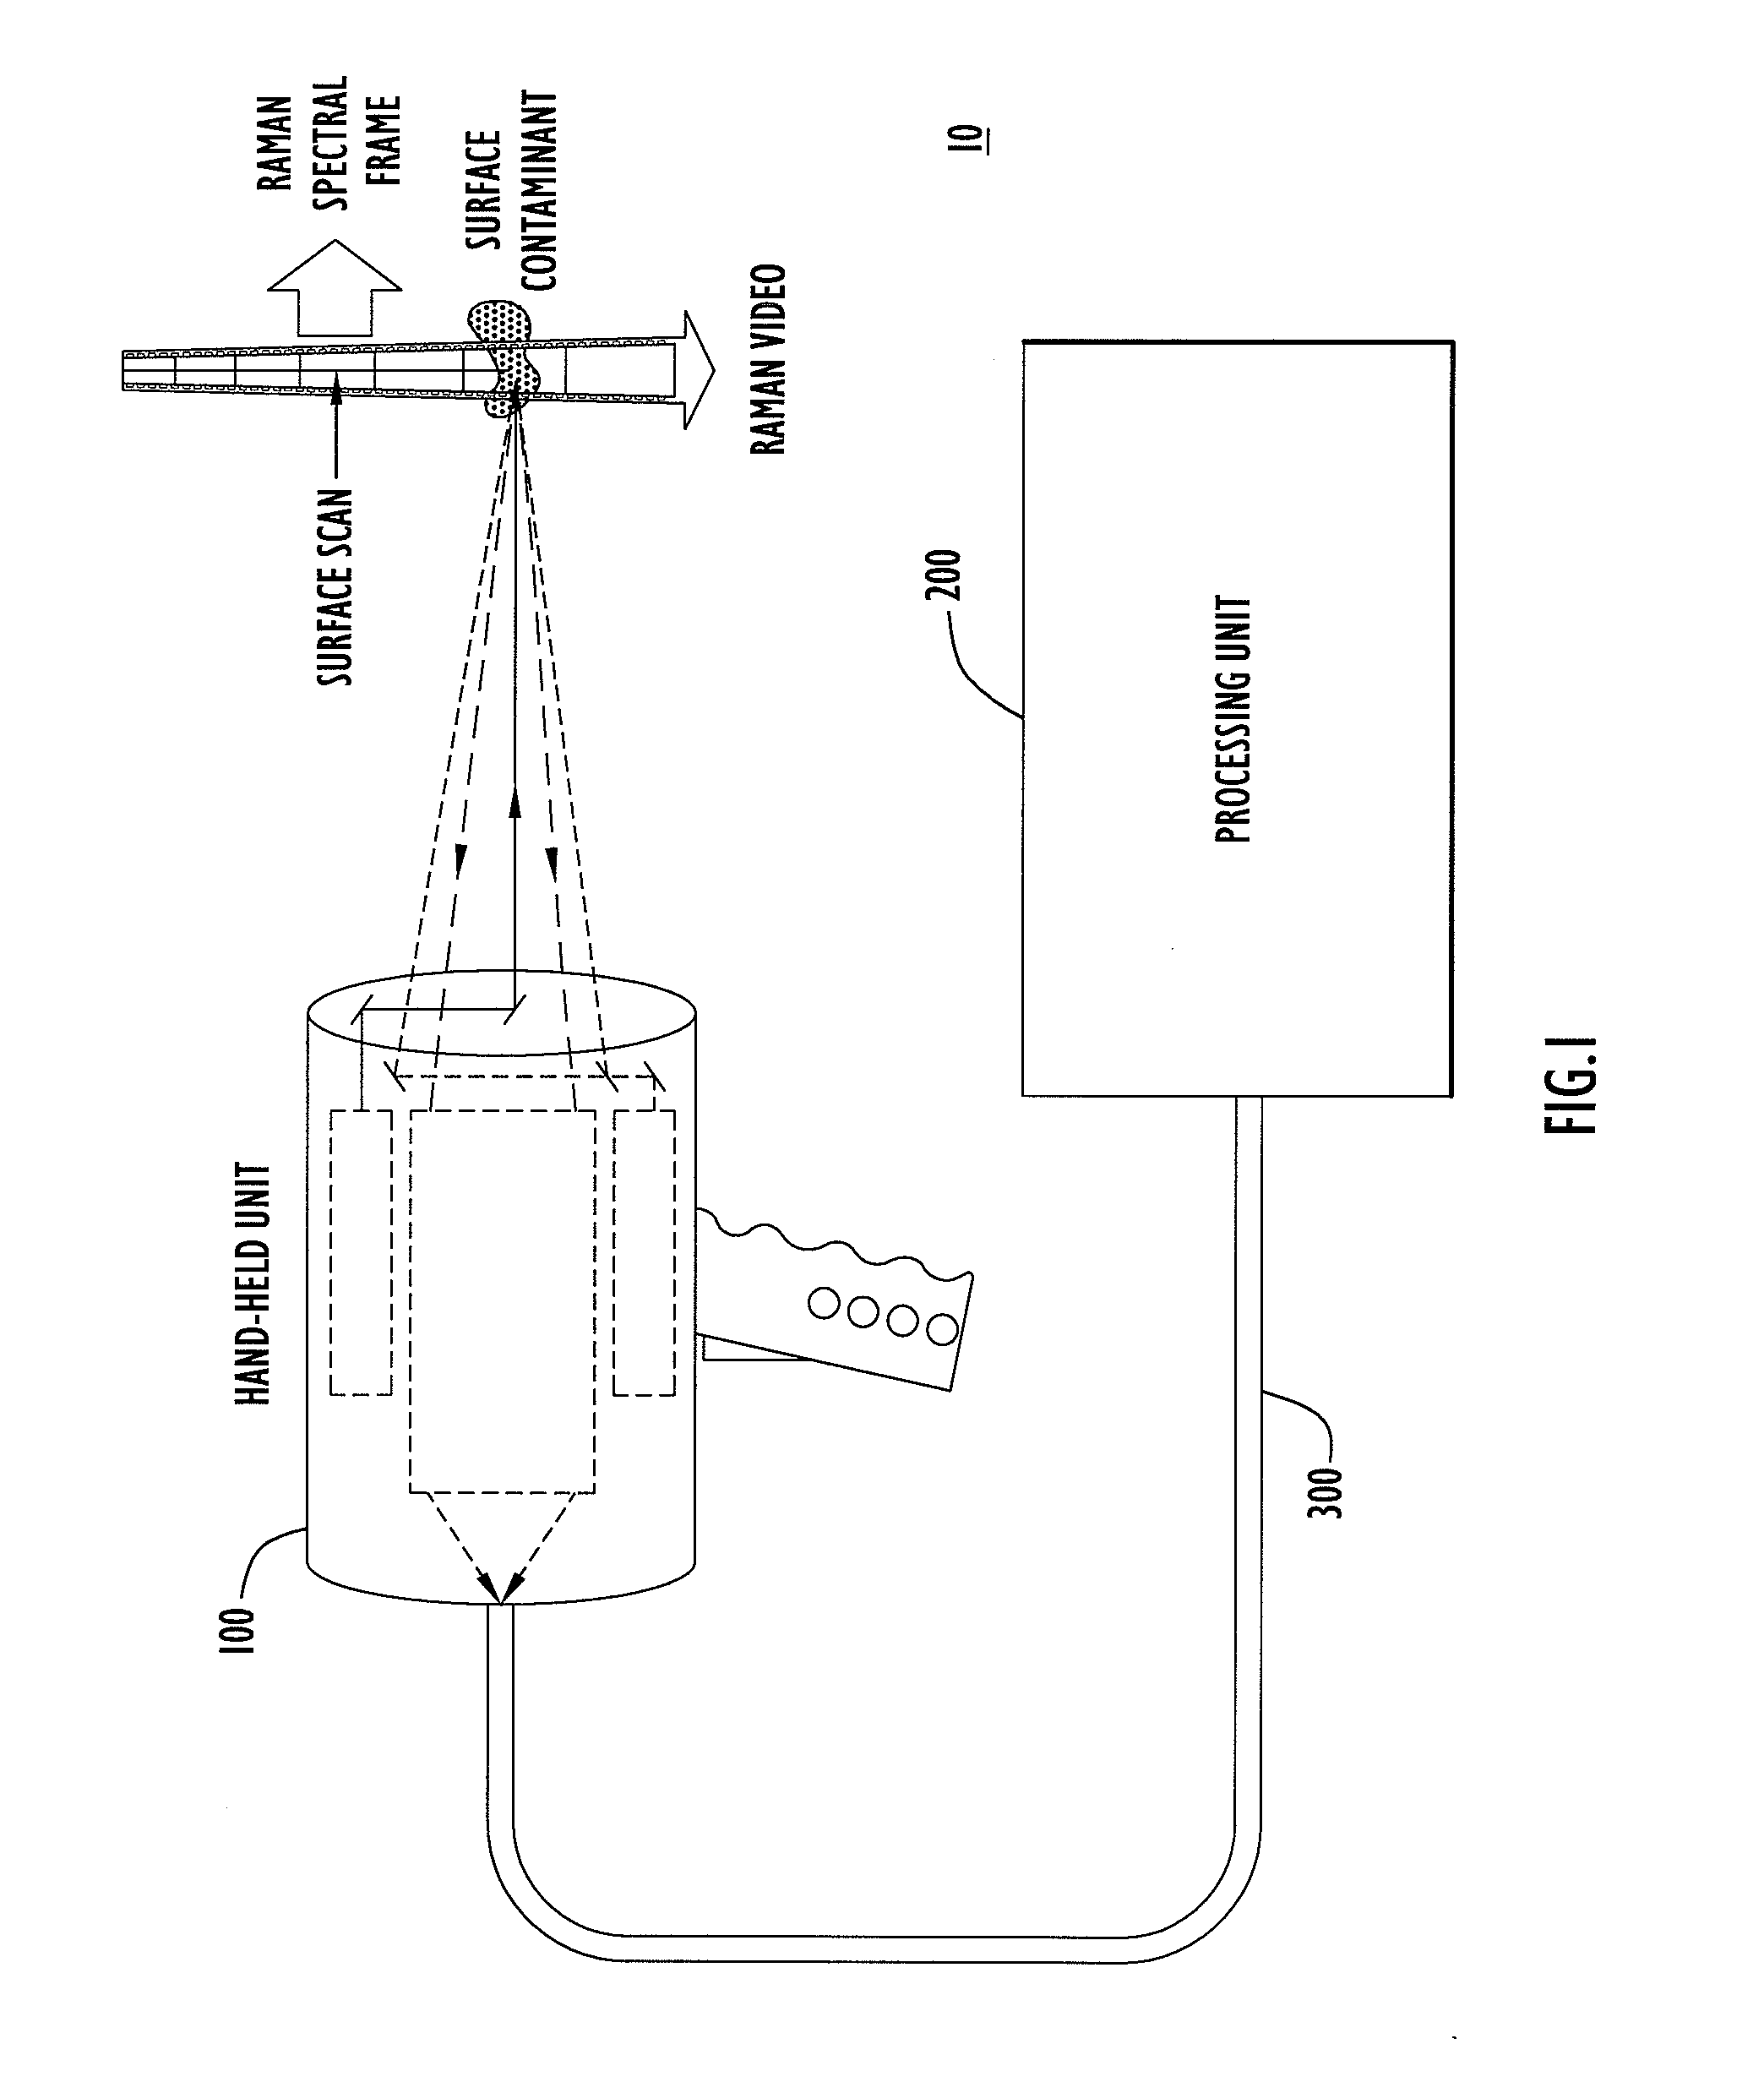 Method, Apparatus and System for Rapid and Sensitive Standoff Detection of Surface Contaminants